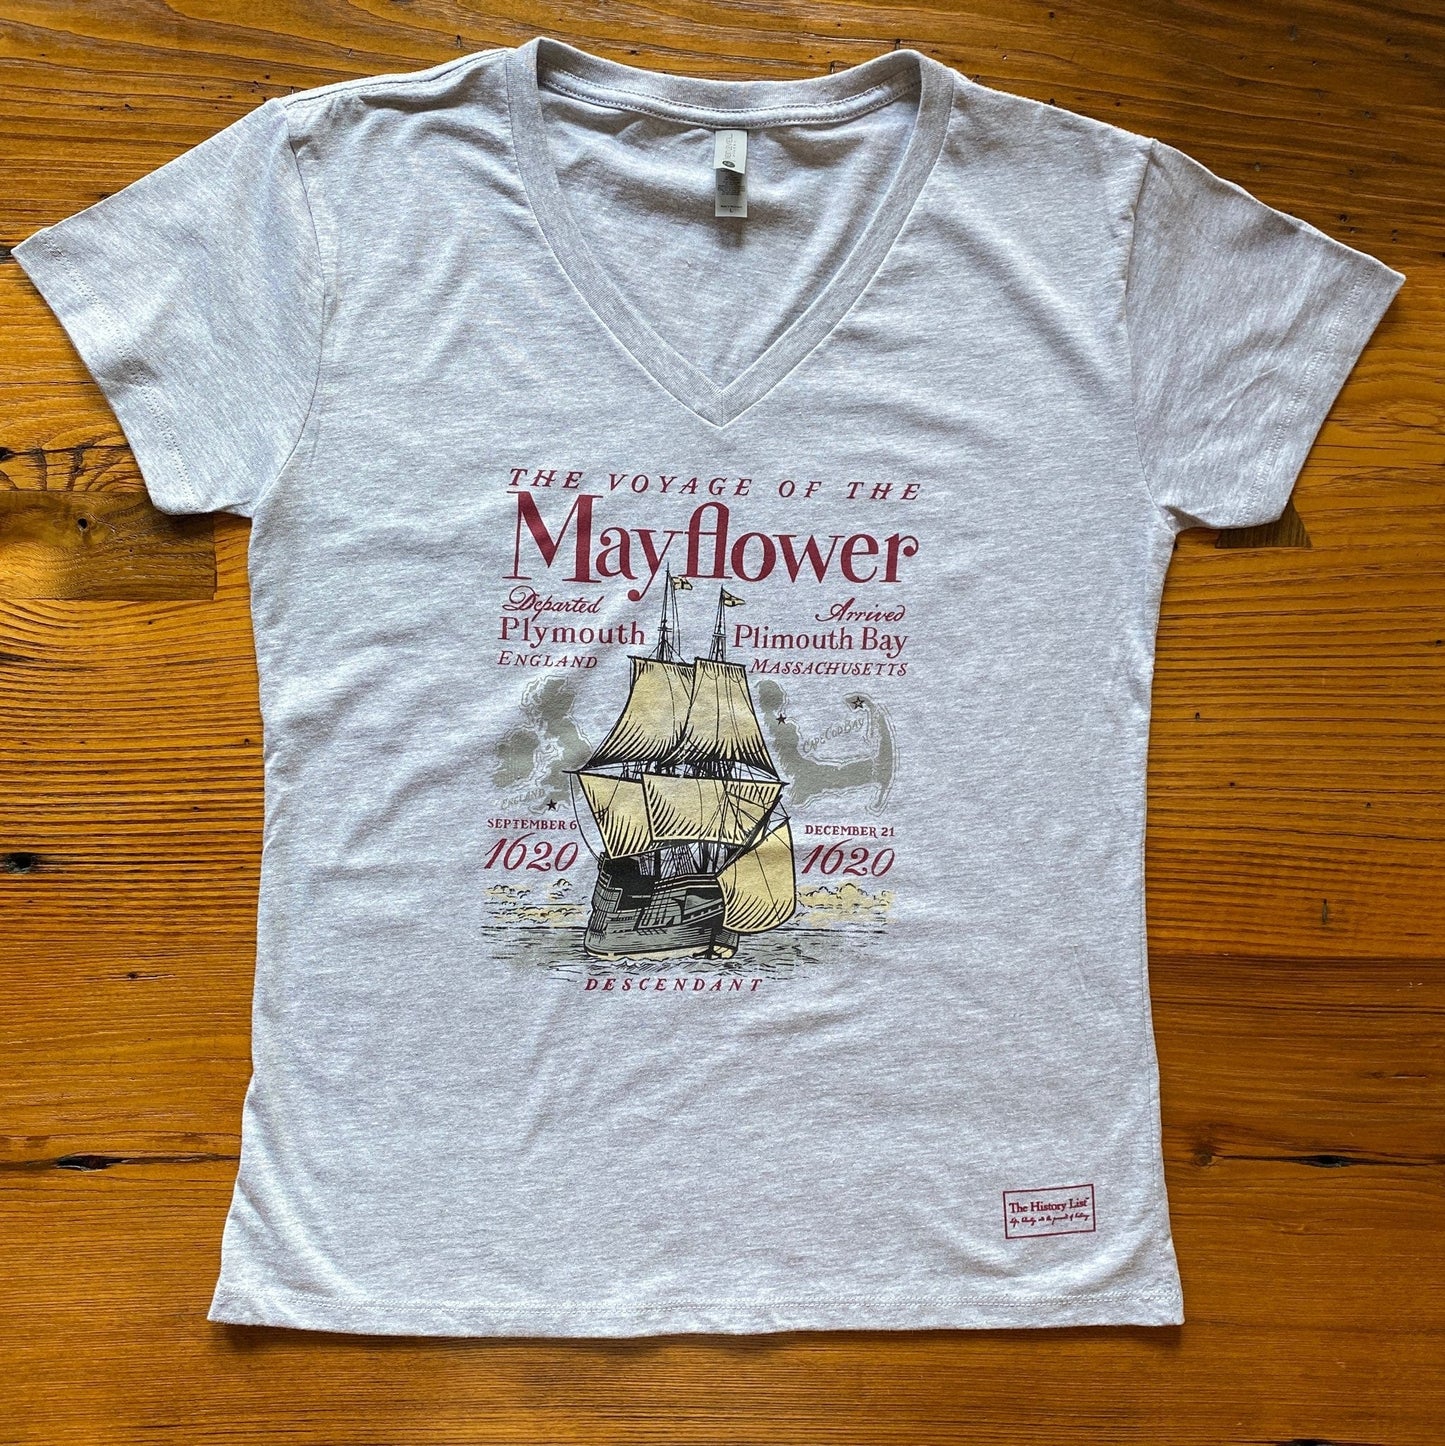 Grey "The Voyage of the Mayflower" Women's v-neck shirt from the history list store